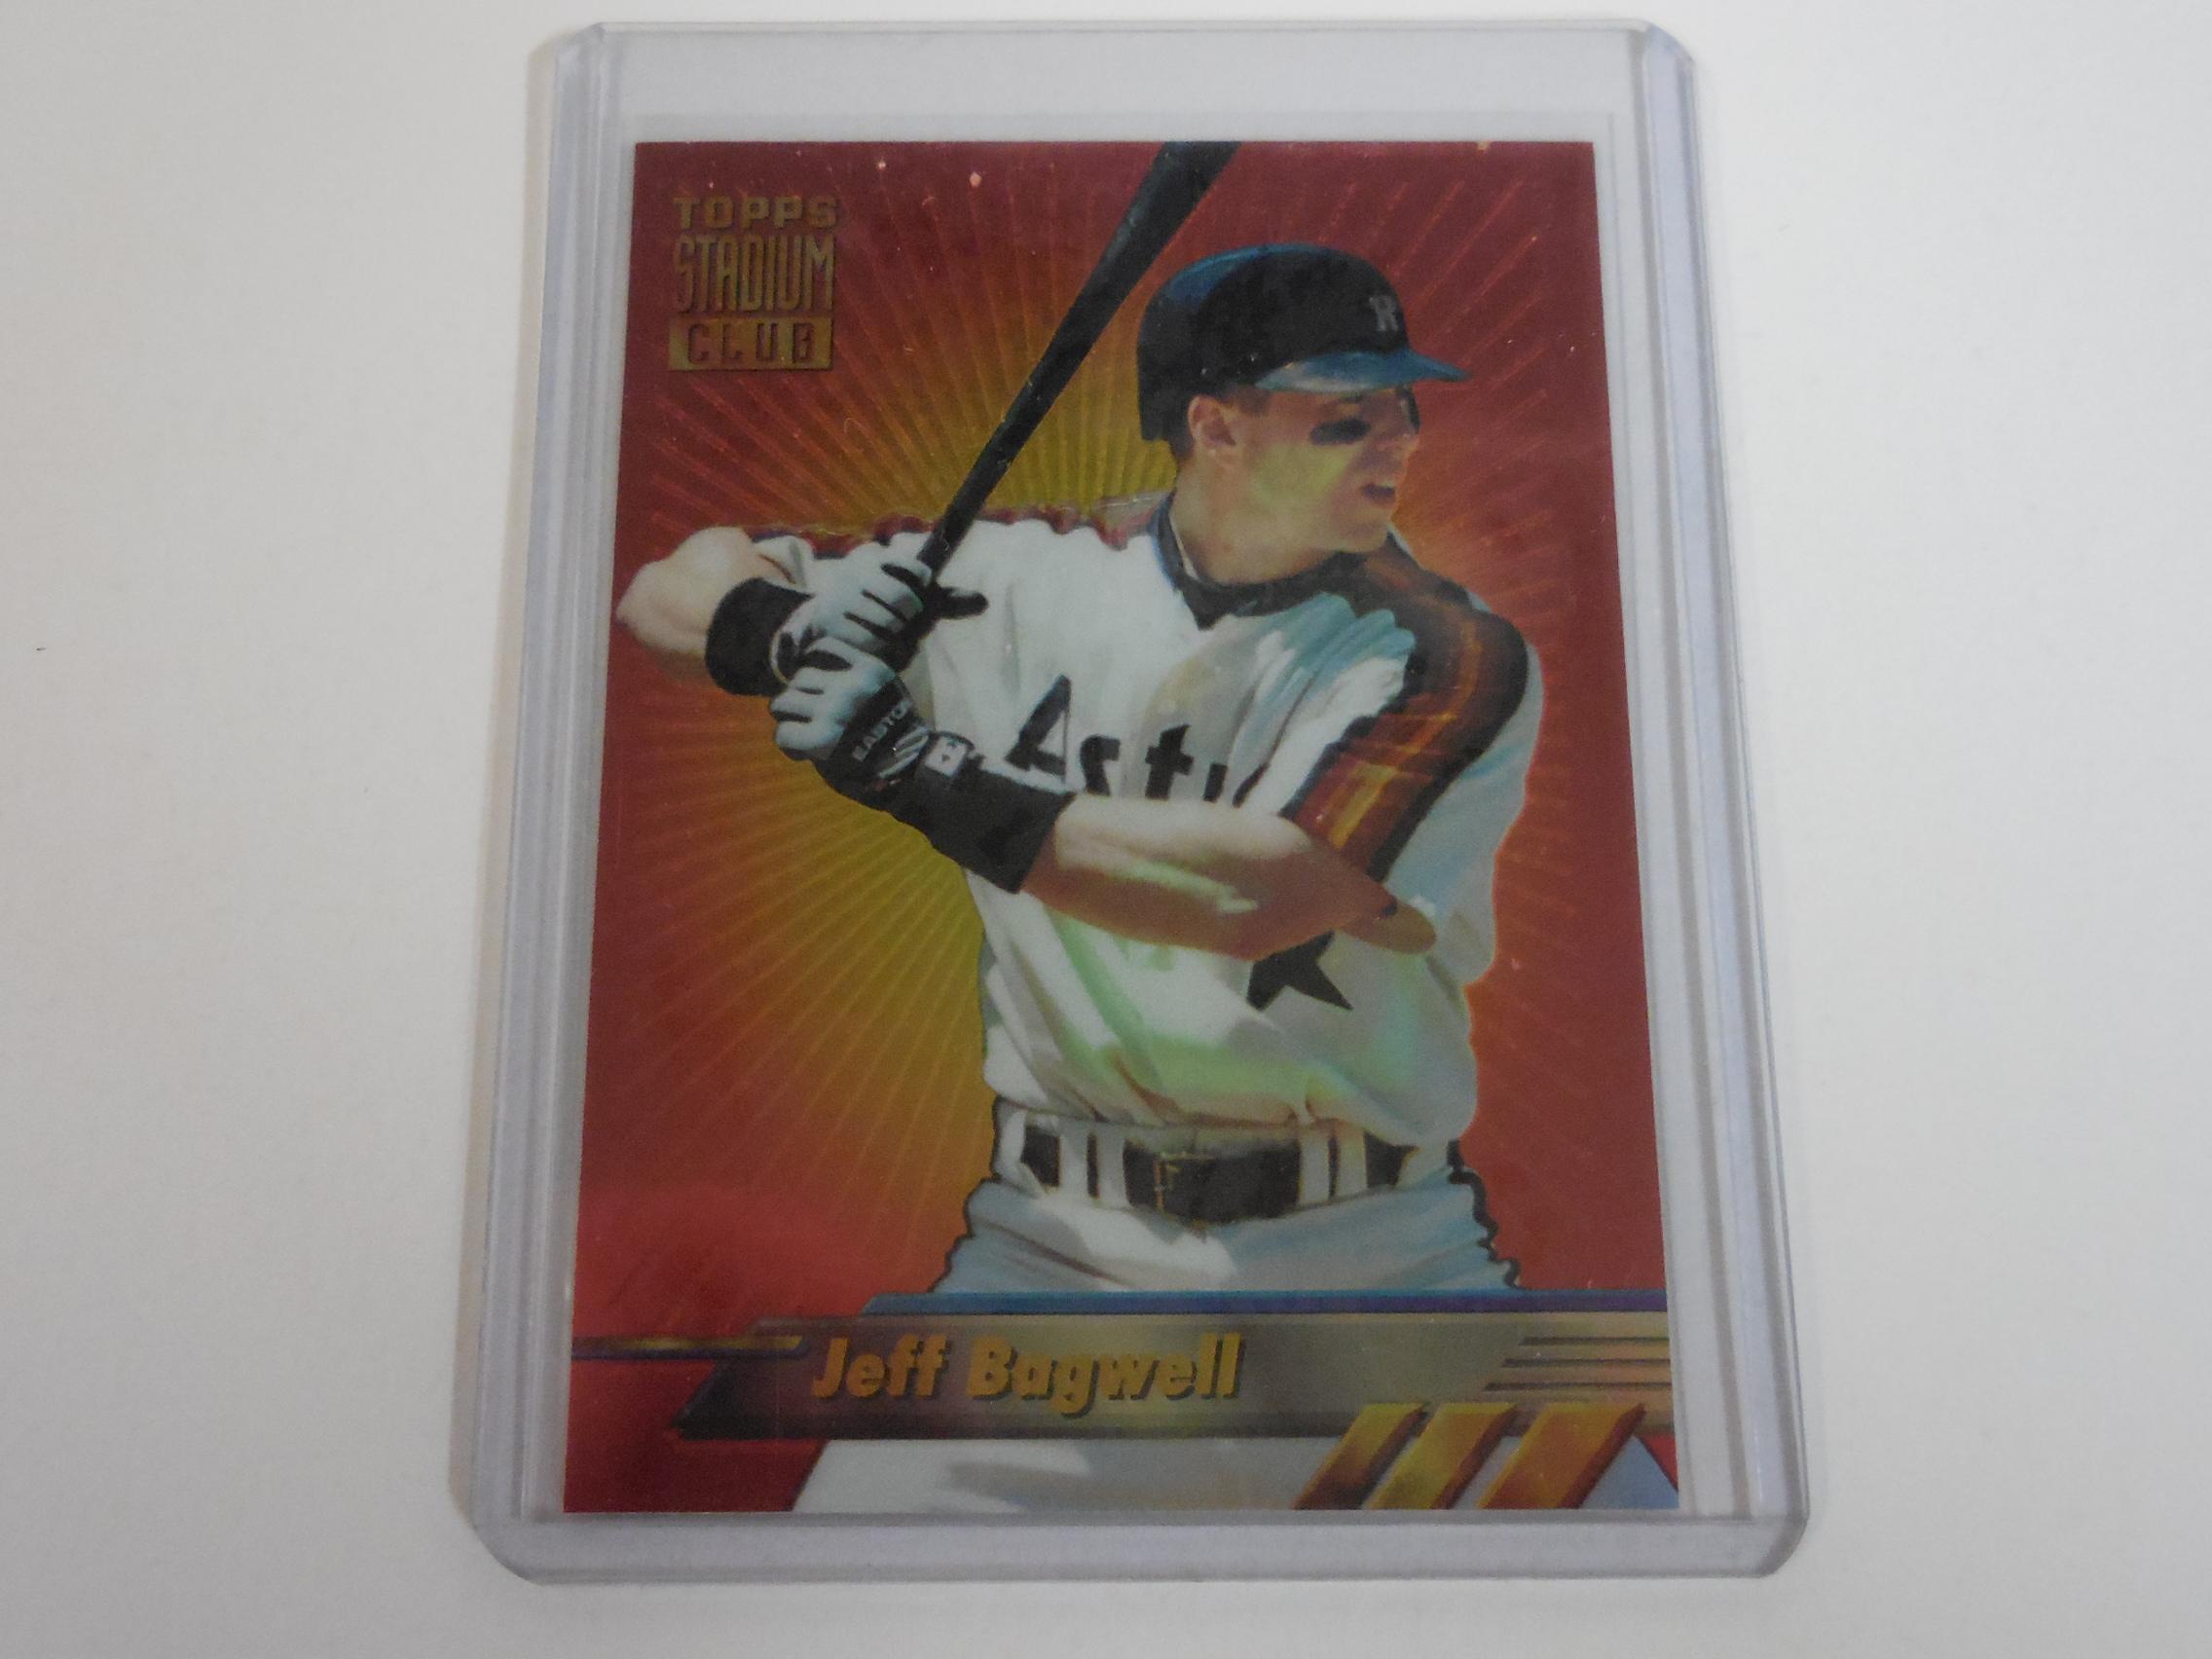 1994 TOPPS STADIUM CLUB JEFF BAGWELL FINEST MEMBERS ONLY